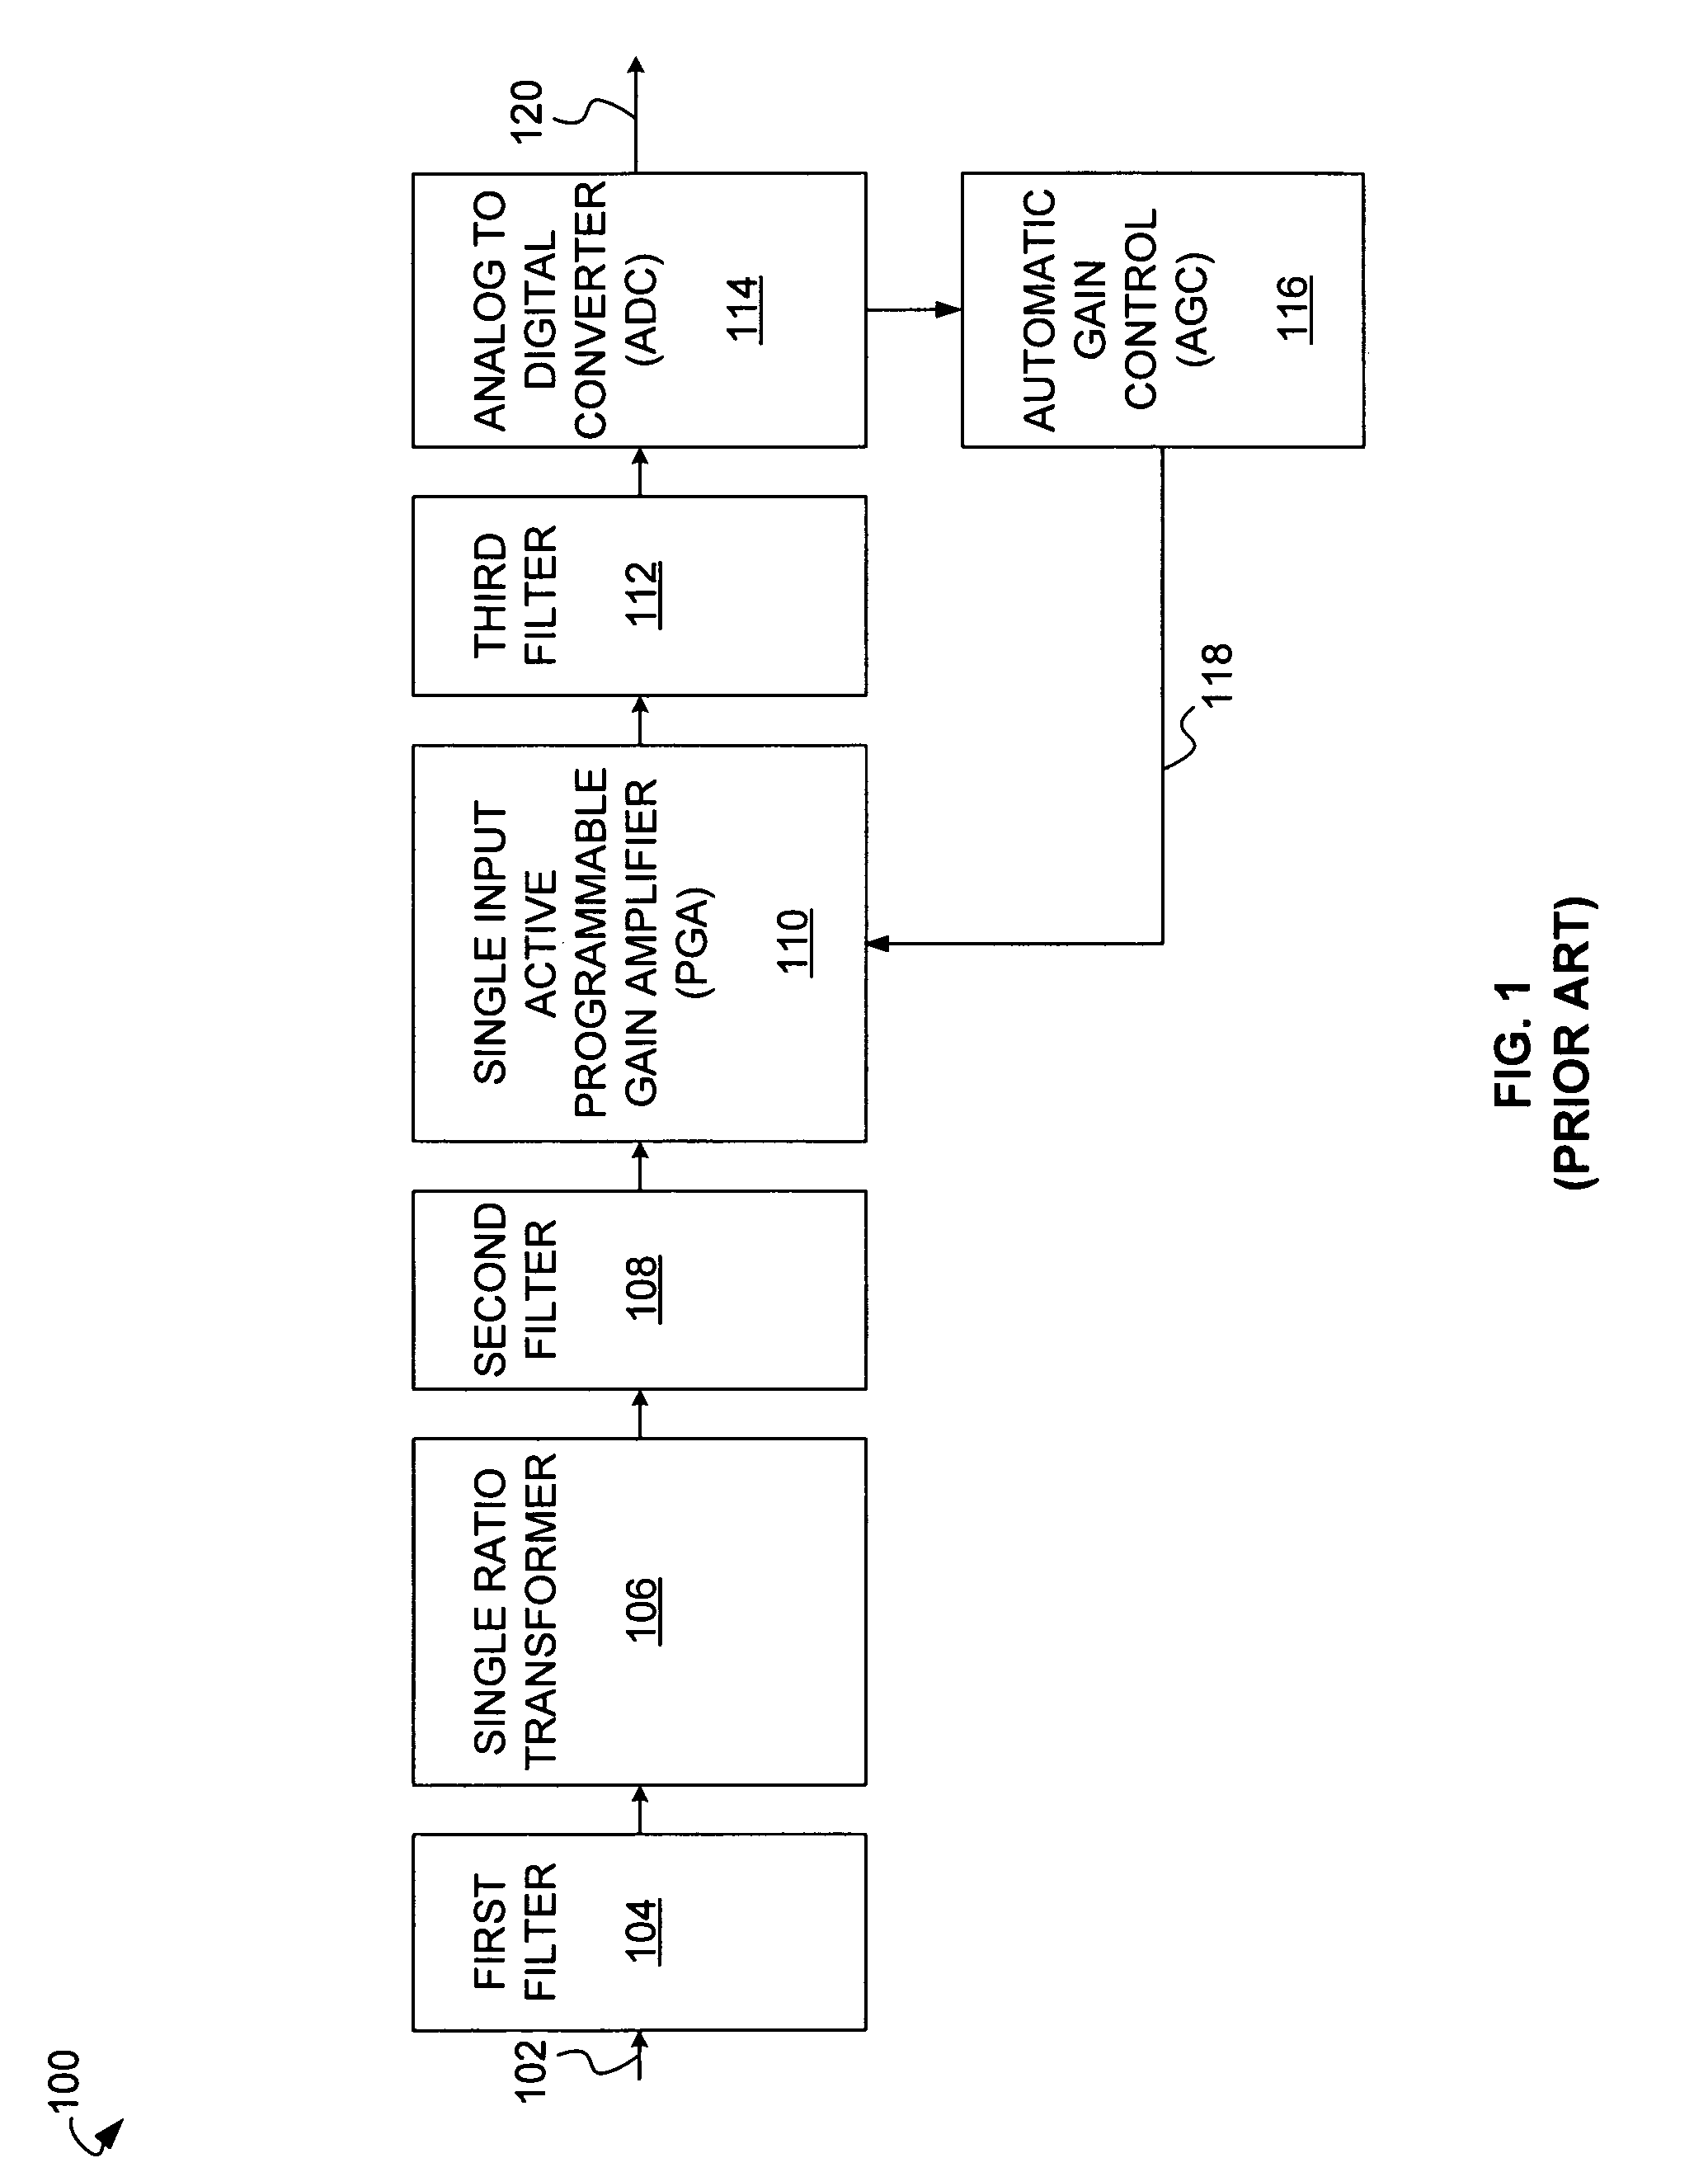 Coupling signal processing circuitry with a wireline communications medium